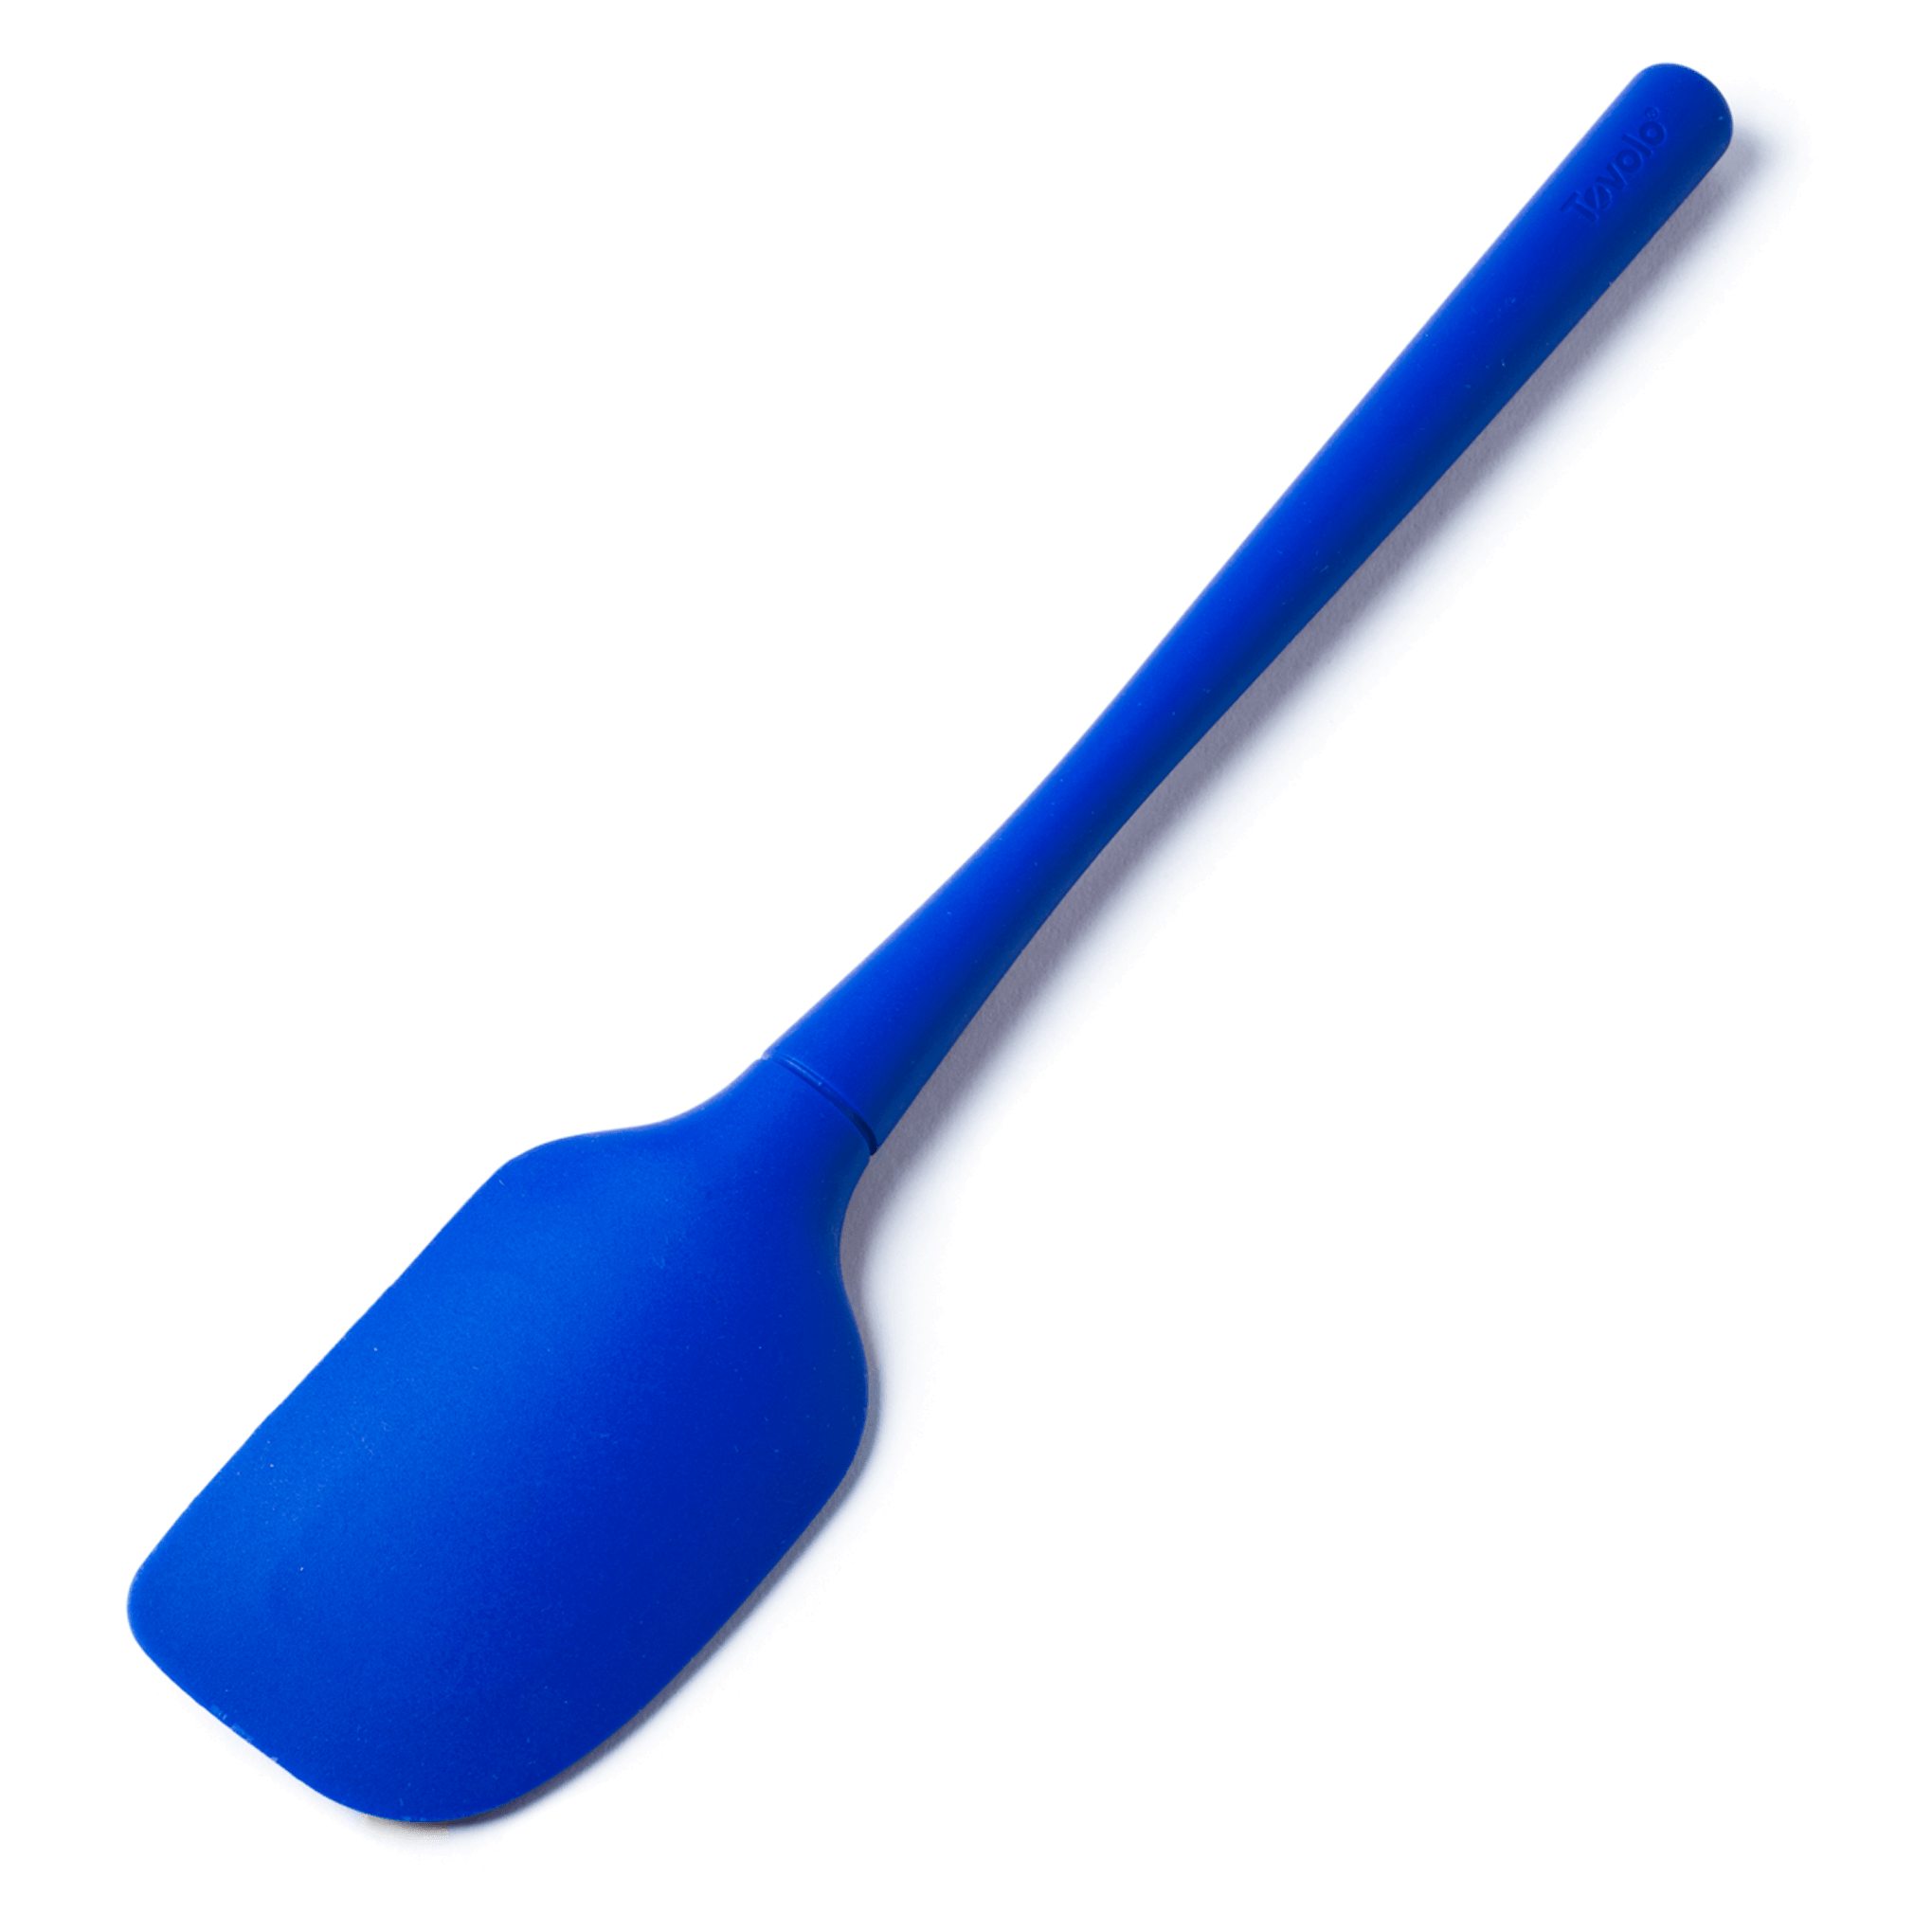 Best All Purpose Silicone Spatula For Baking & High Heat Review - Tovolo -  HubPages